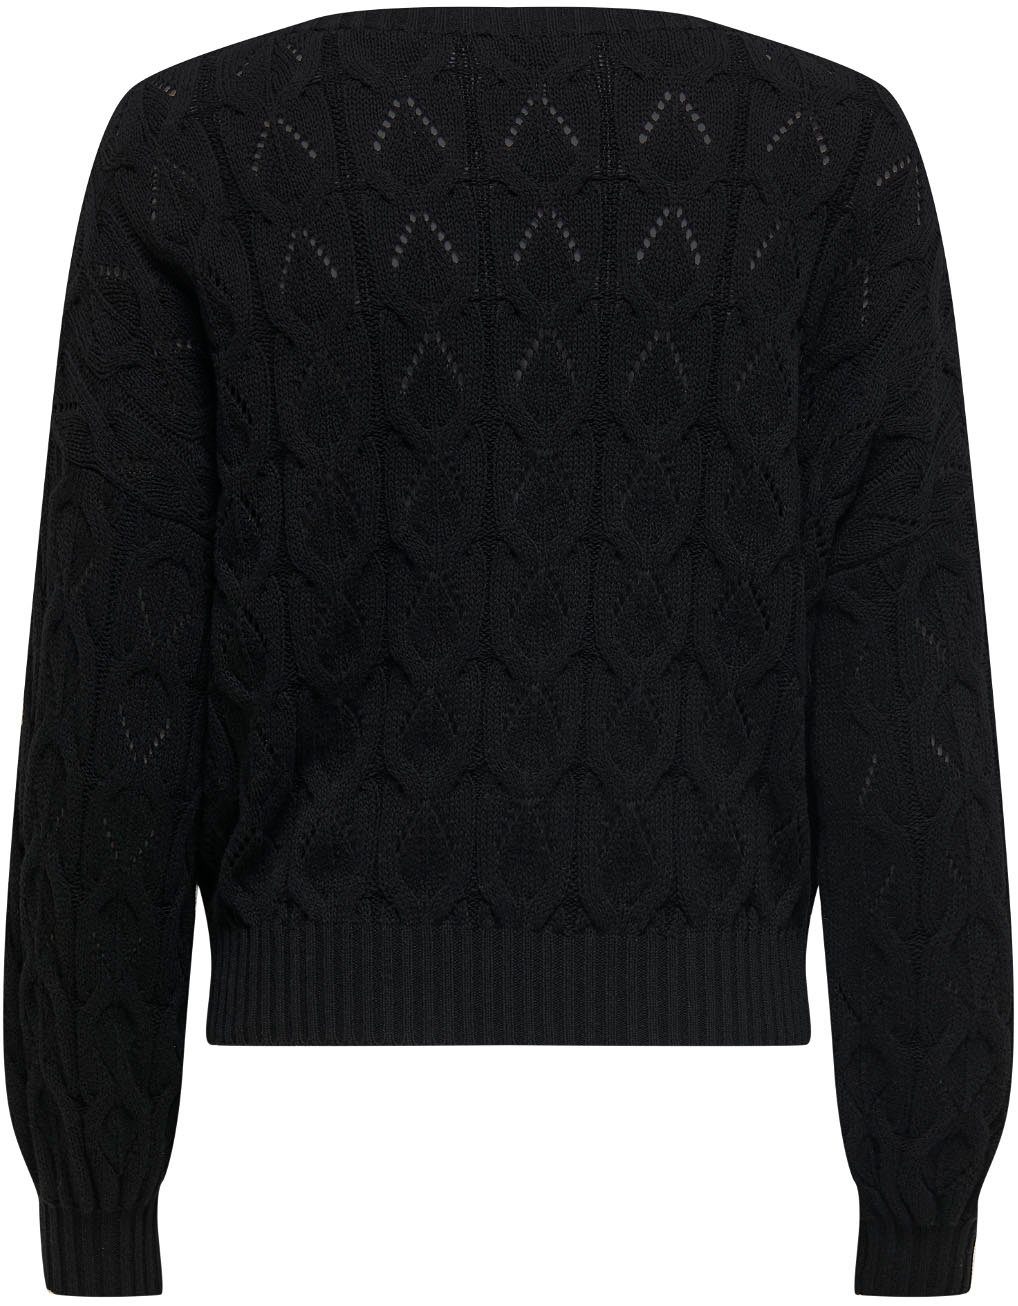 Strickpullover ONLY KNT Black STRUCTURE ONLBRYNN L/S PUL LIFE